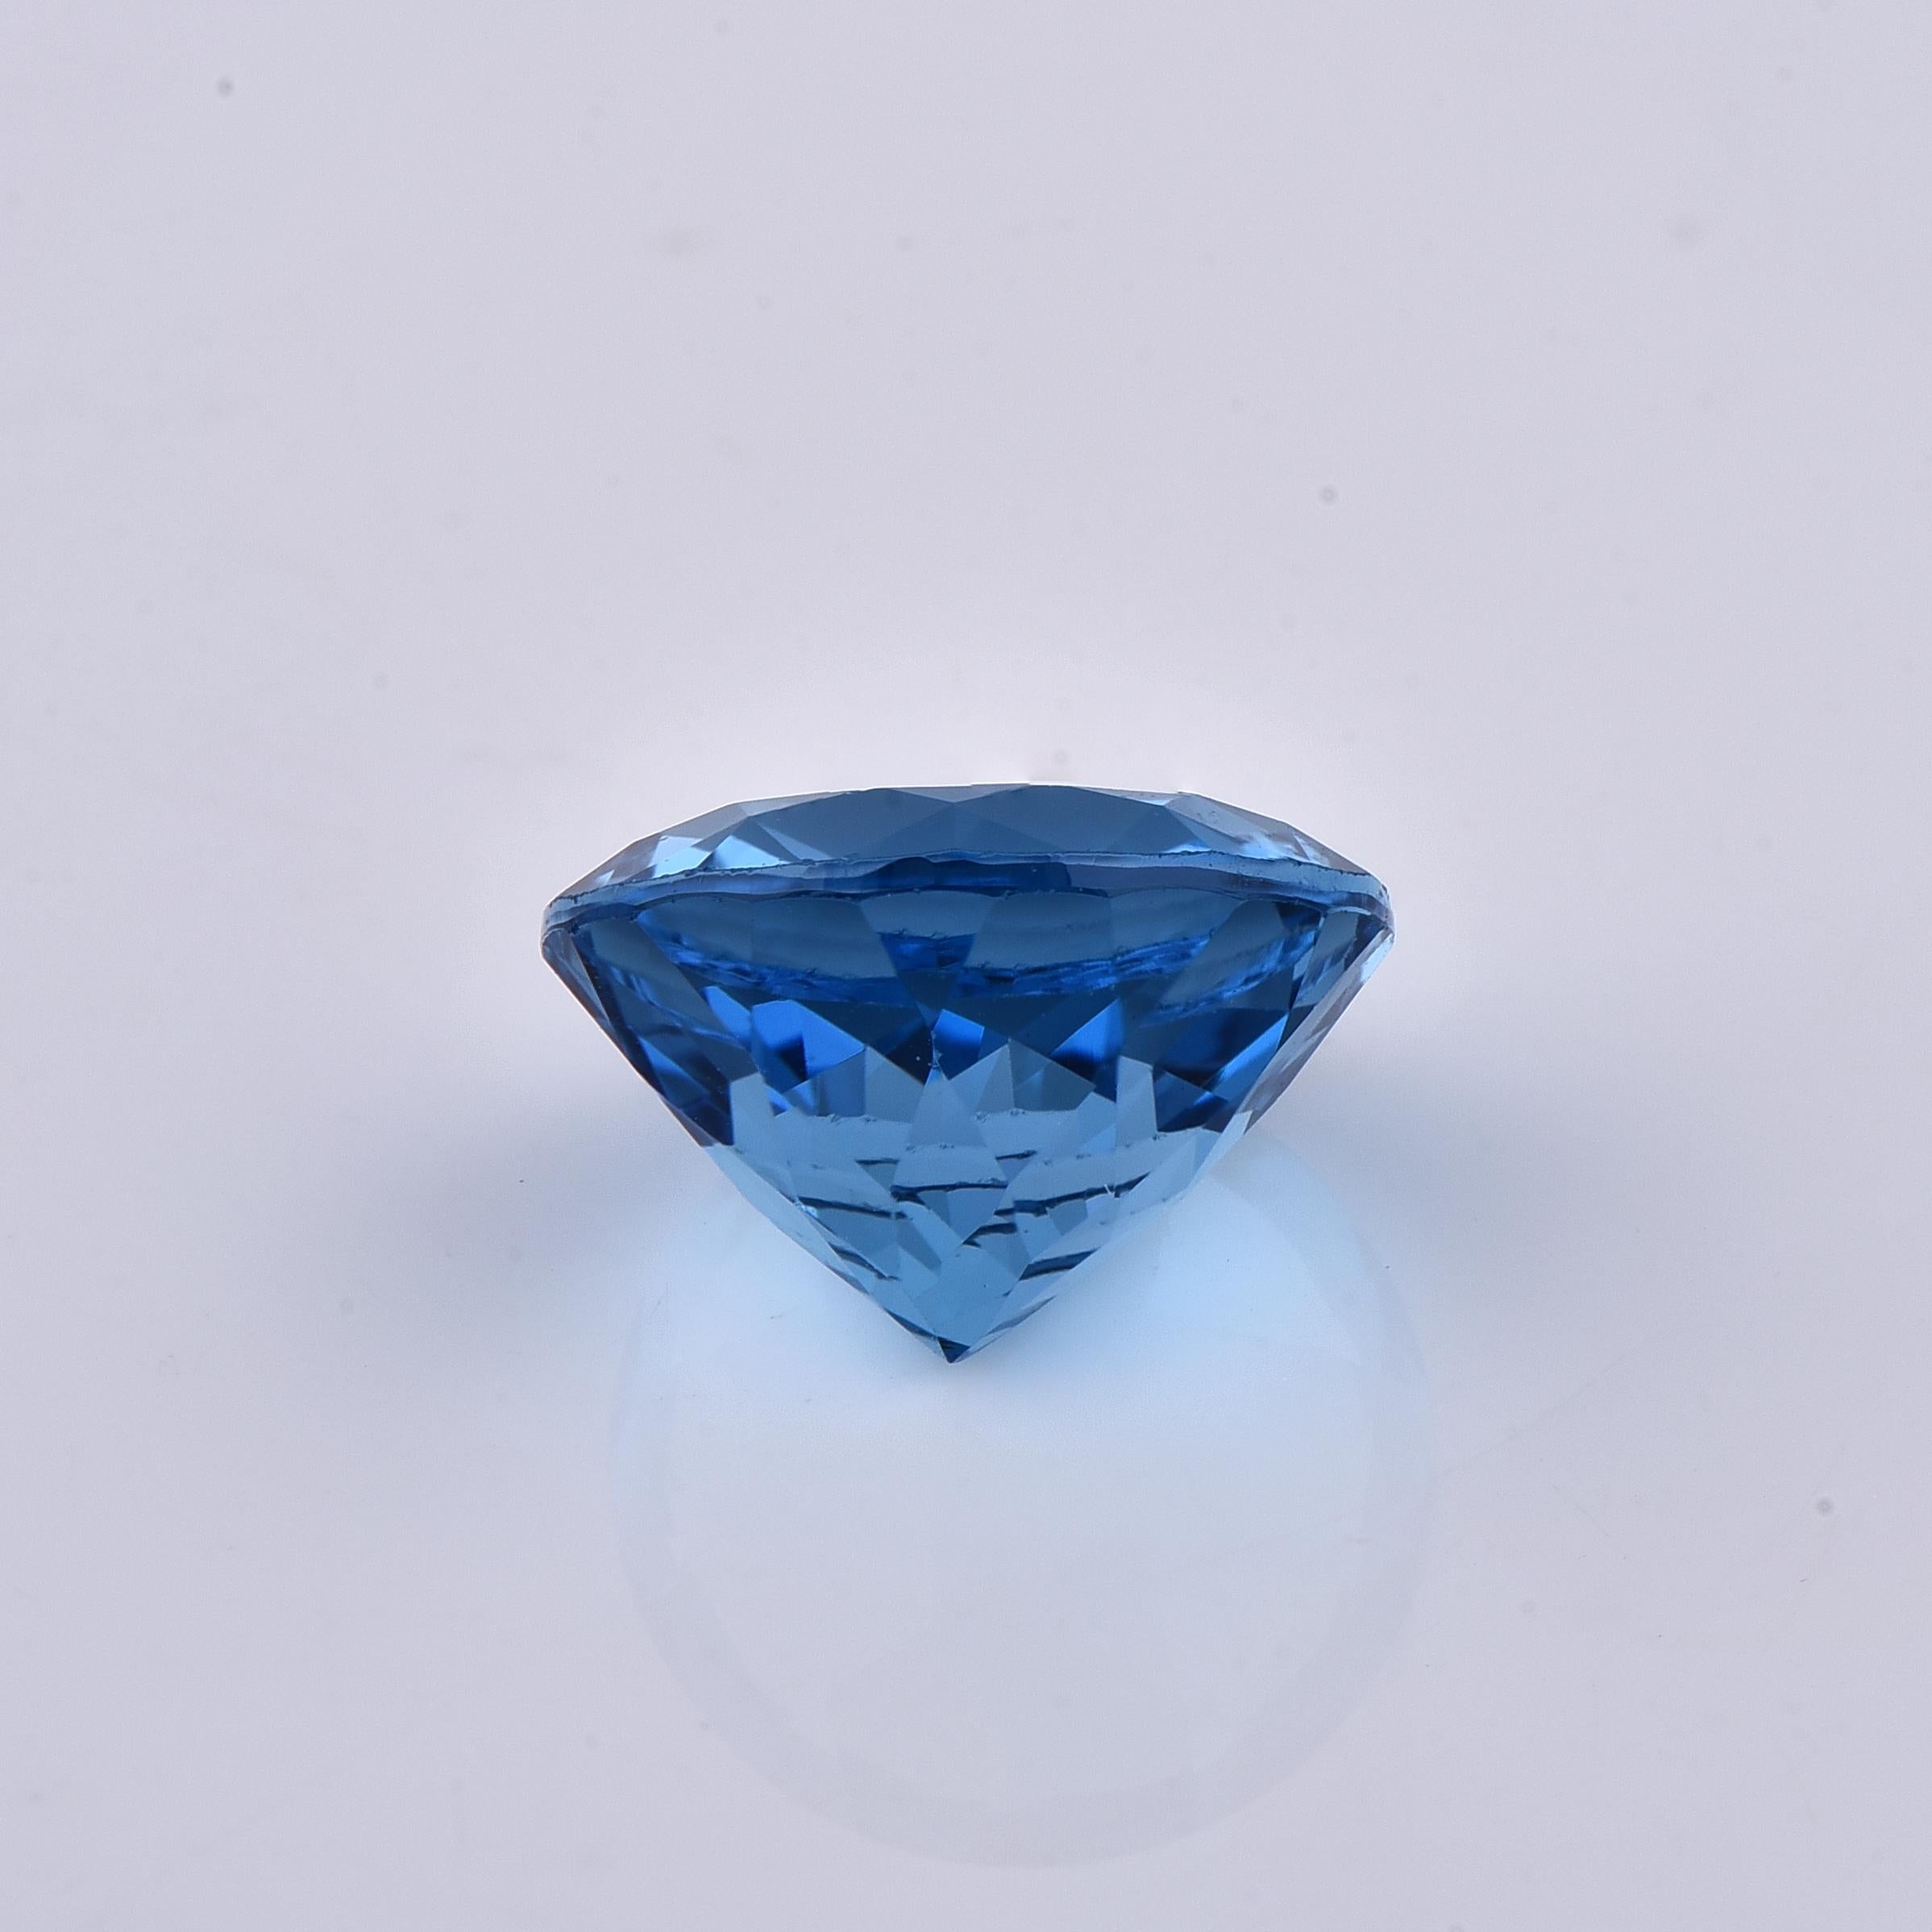 Create Ring or Pendant of your dream with this 12 MM Natural Swiss Blue Topaz Loose Gemstone. We can suggest you designs as per your requirement.

We are happy for you to purchase only the gemstone to take to your local jeweler to make the jewellery